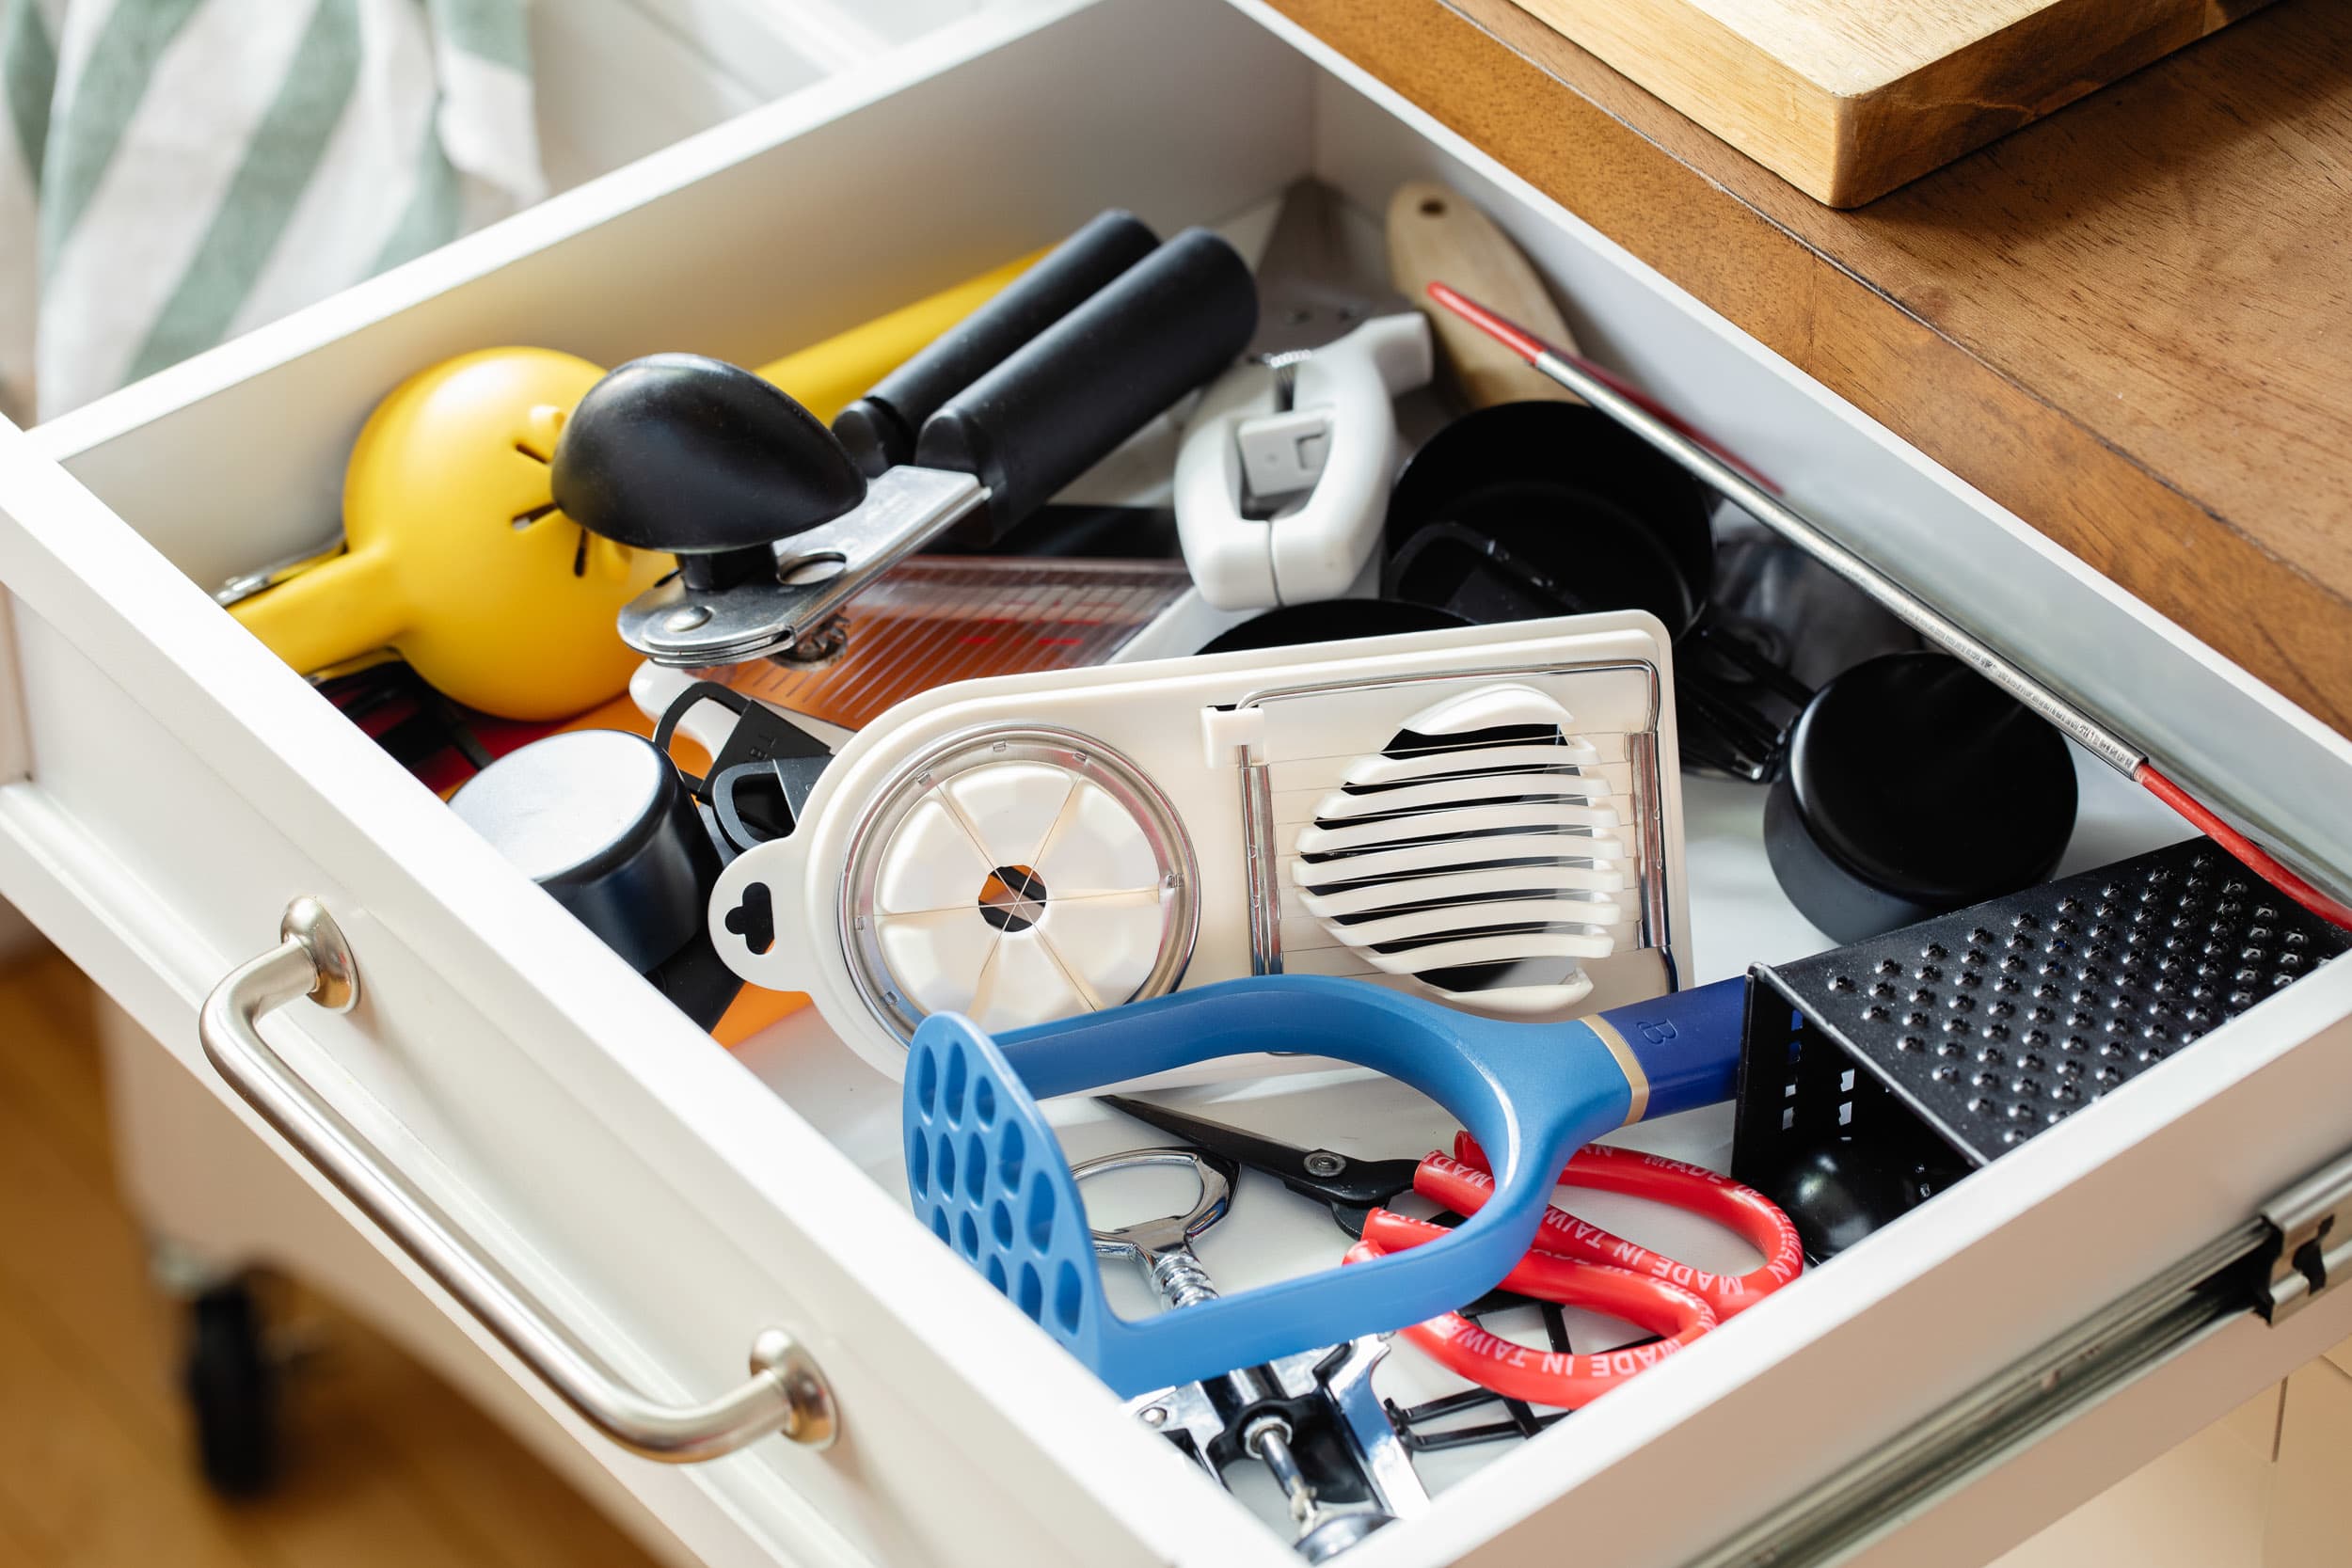 https://cdn.apartmenttherapy.info/image/upload/v1628706207/k/Photo/Lifestyle/2021-08-The-Most-Brilliant-Drawer-Organizing-Tip-That-Everyone-Needs-to-Hear/Kitchn-2021-Drawer-Organizing-Tip-1.jpg